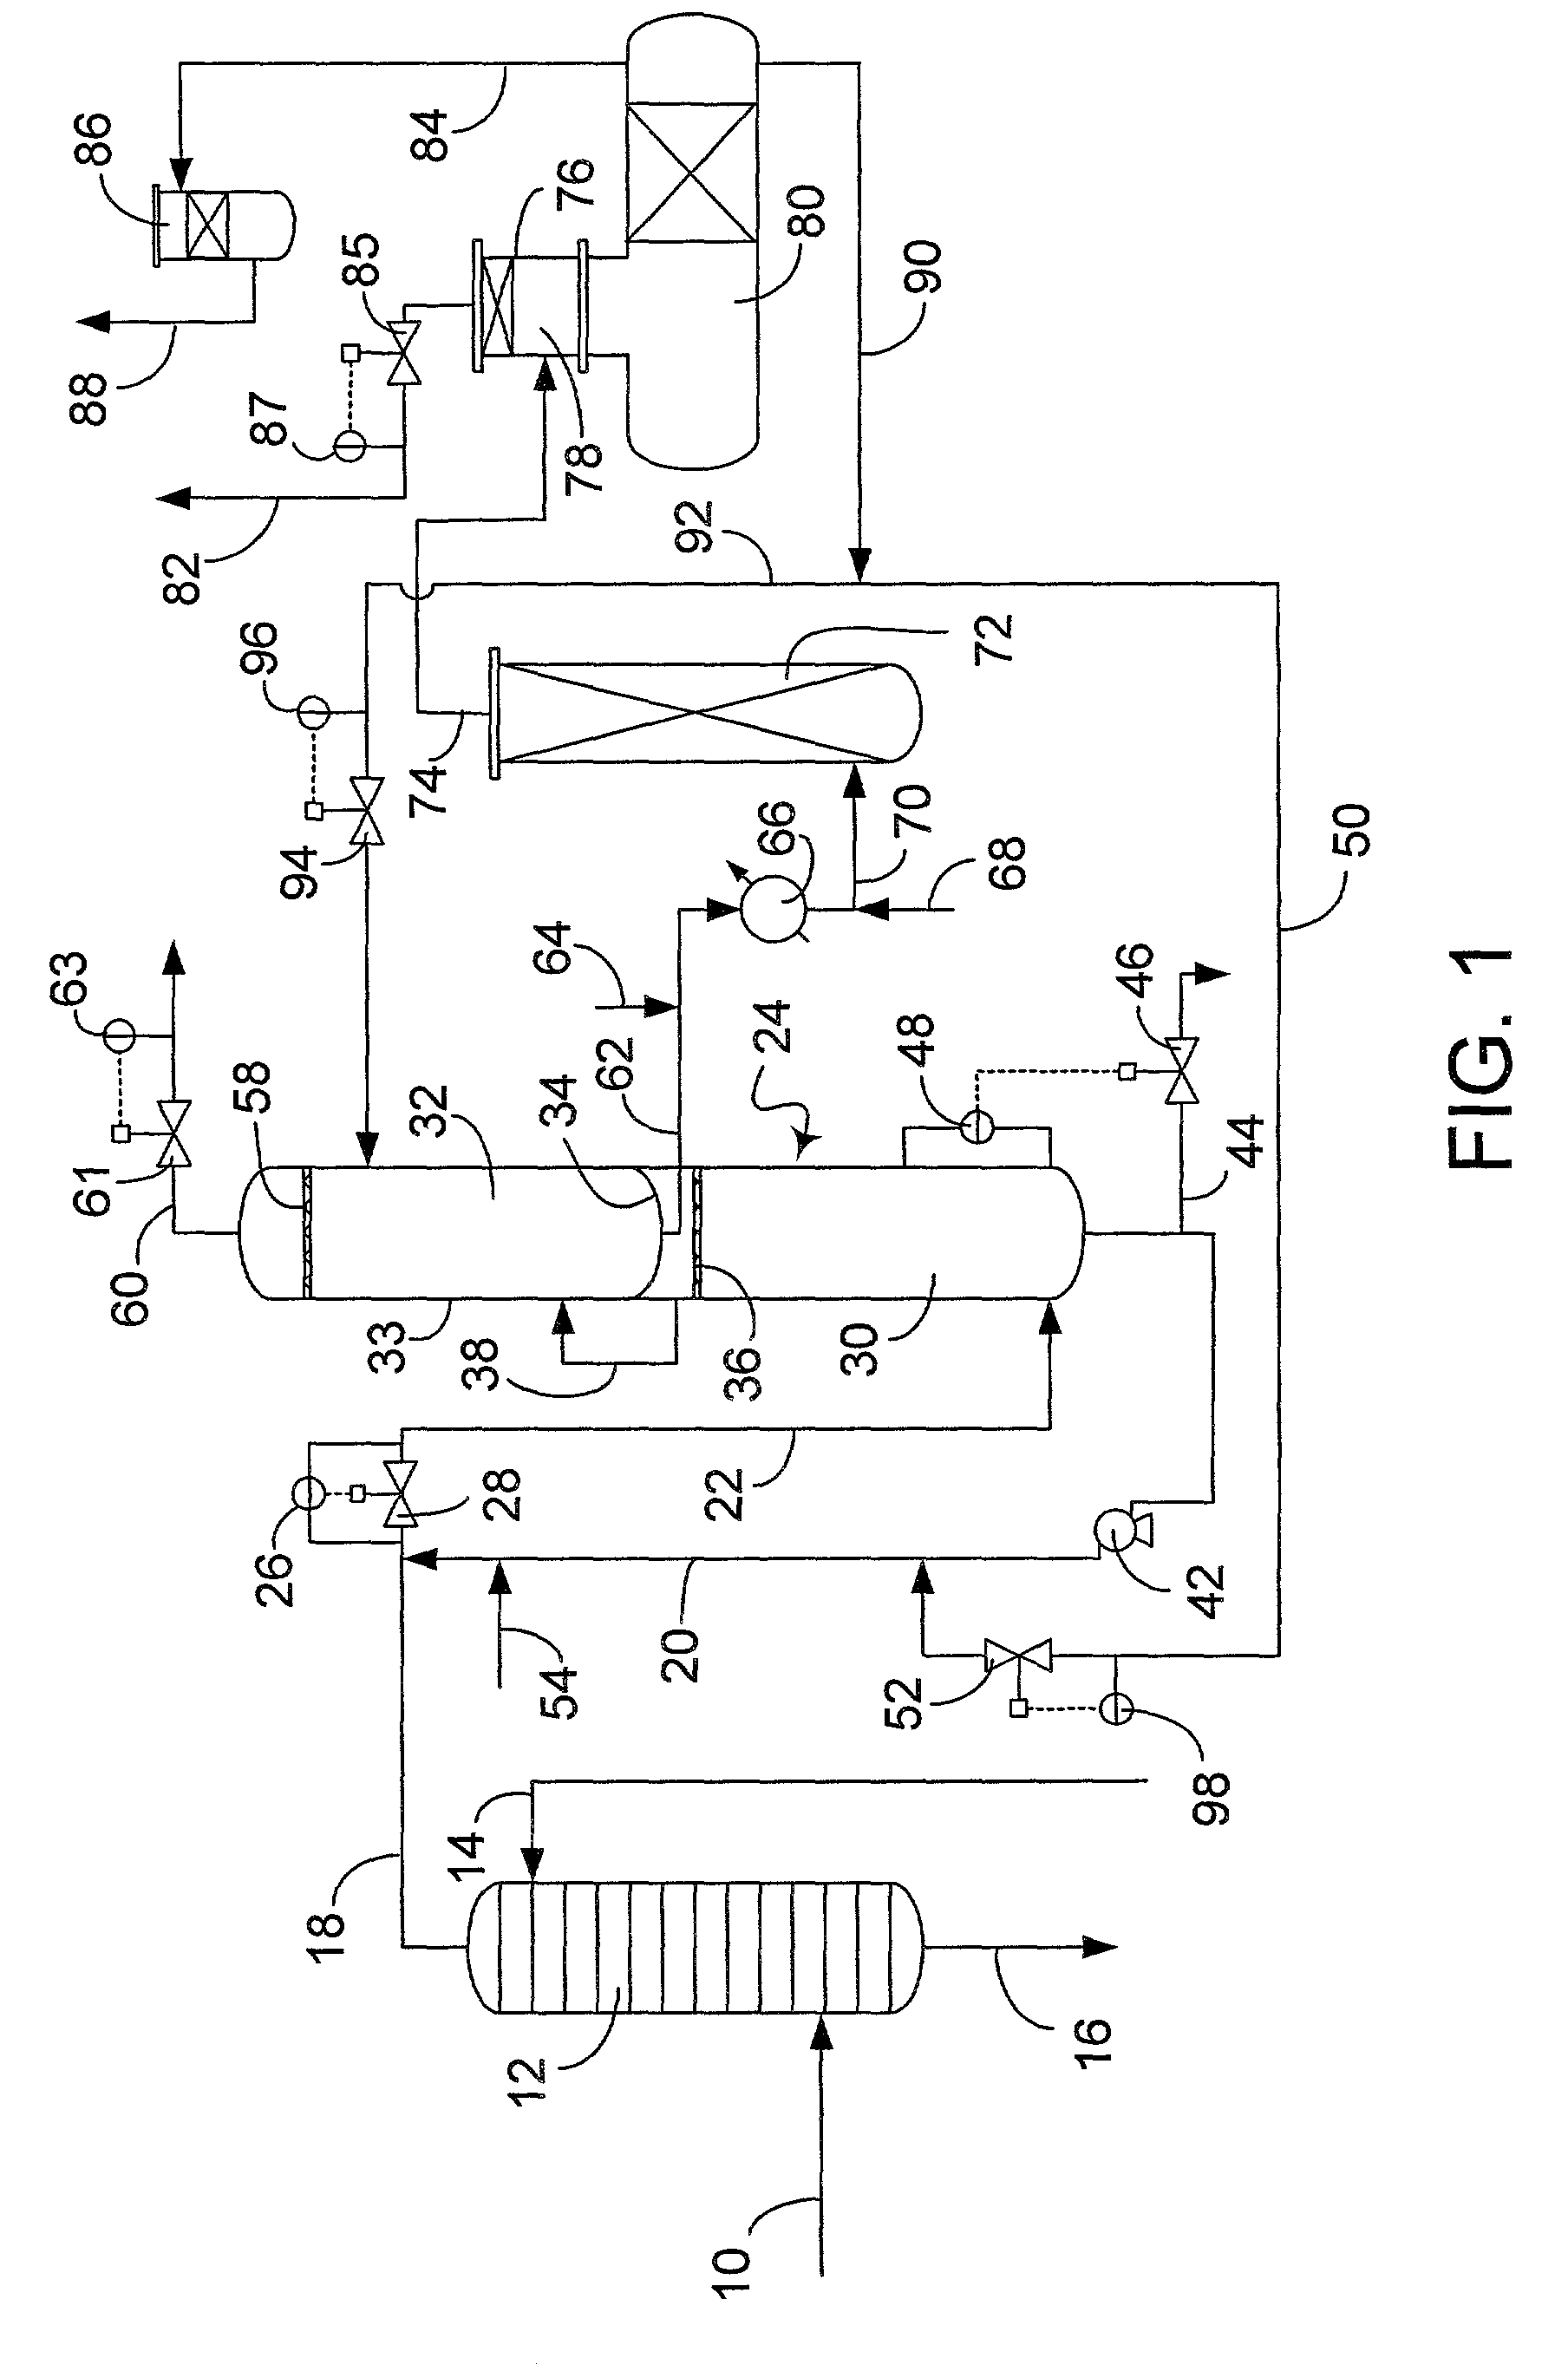 Apparatus and process for extracting sulfur compounds from a hydrocarbon stream